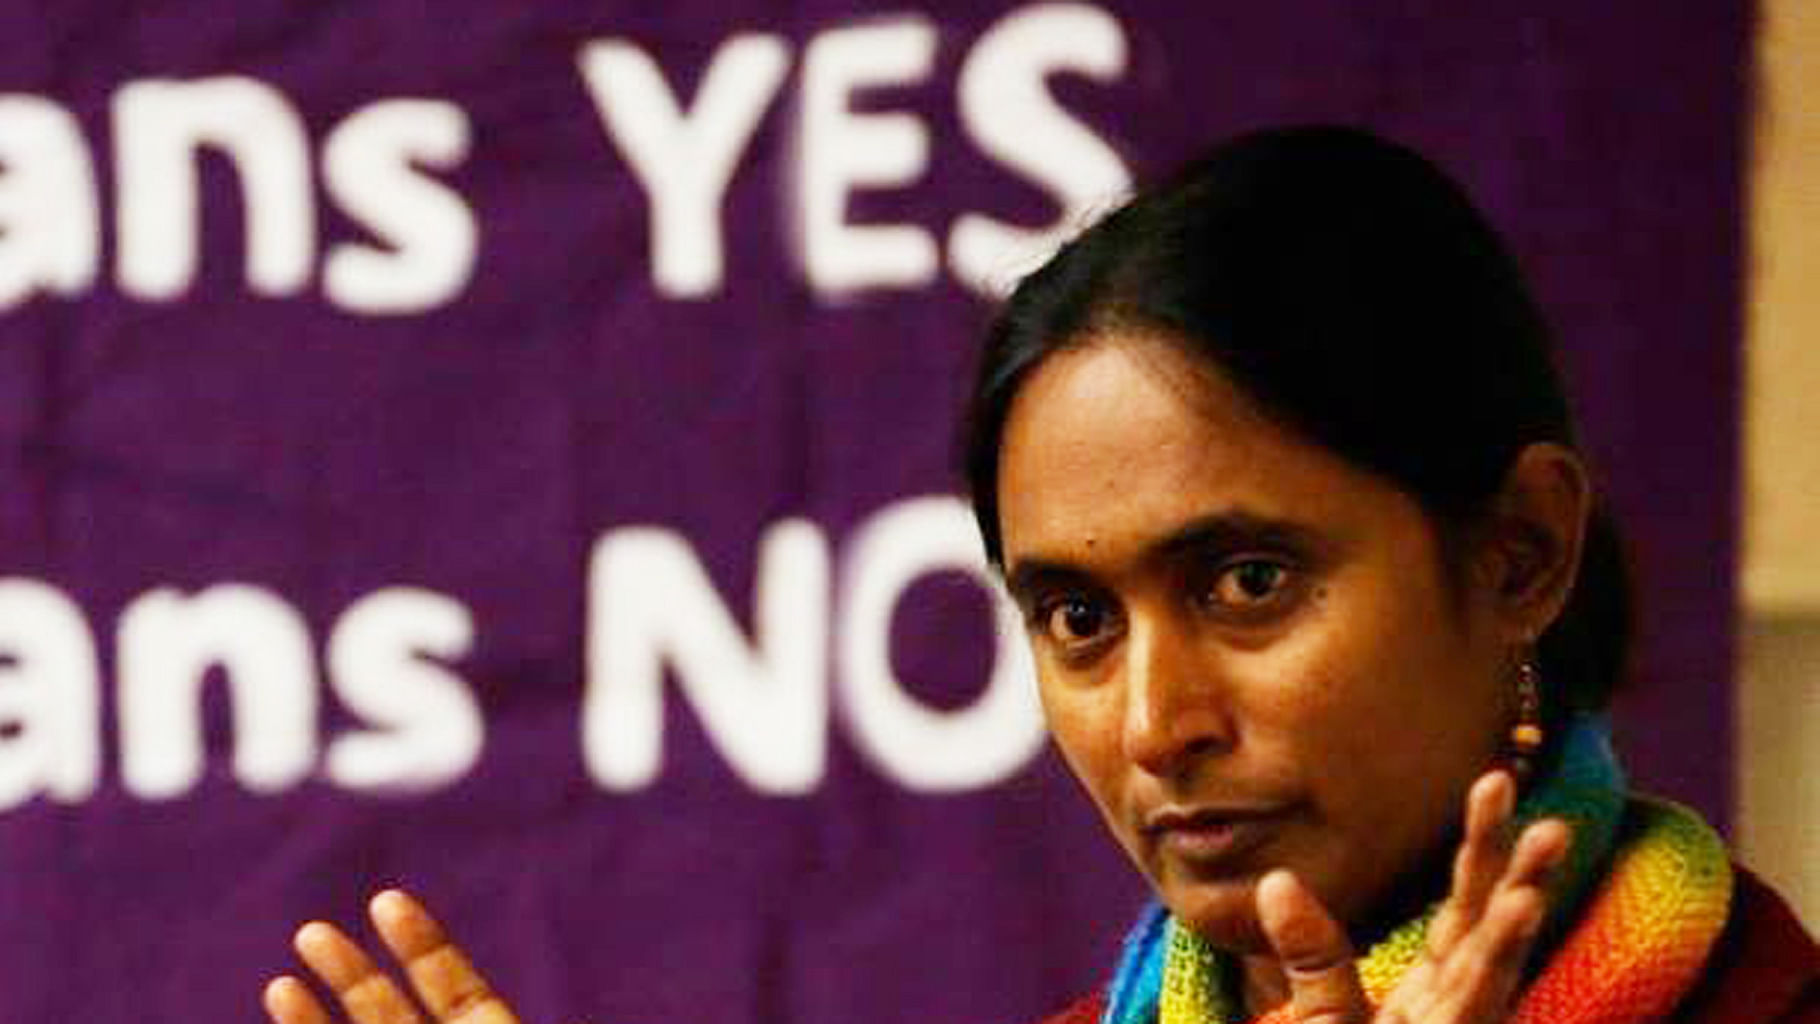 Activist Kavita Krishnan’s mother made an important point about women’s freedom and sexuality. (Photo:<a href="https://www.facebook.com/photo.php?fbid=10203718546665733&amp;set=a.1588343950069.81191.1279934175&amp;type=3&amp;theater"> Kavita Krishnan’s Facebook page</a>)